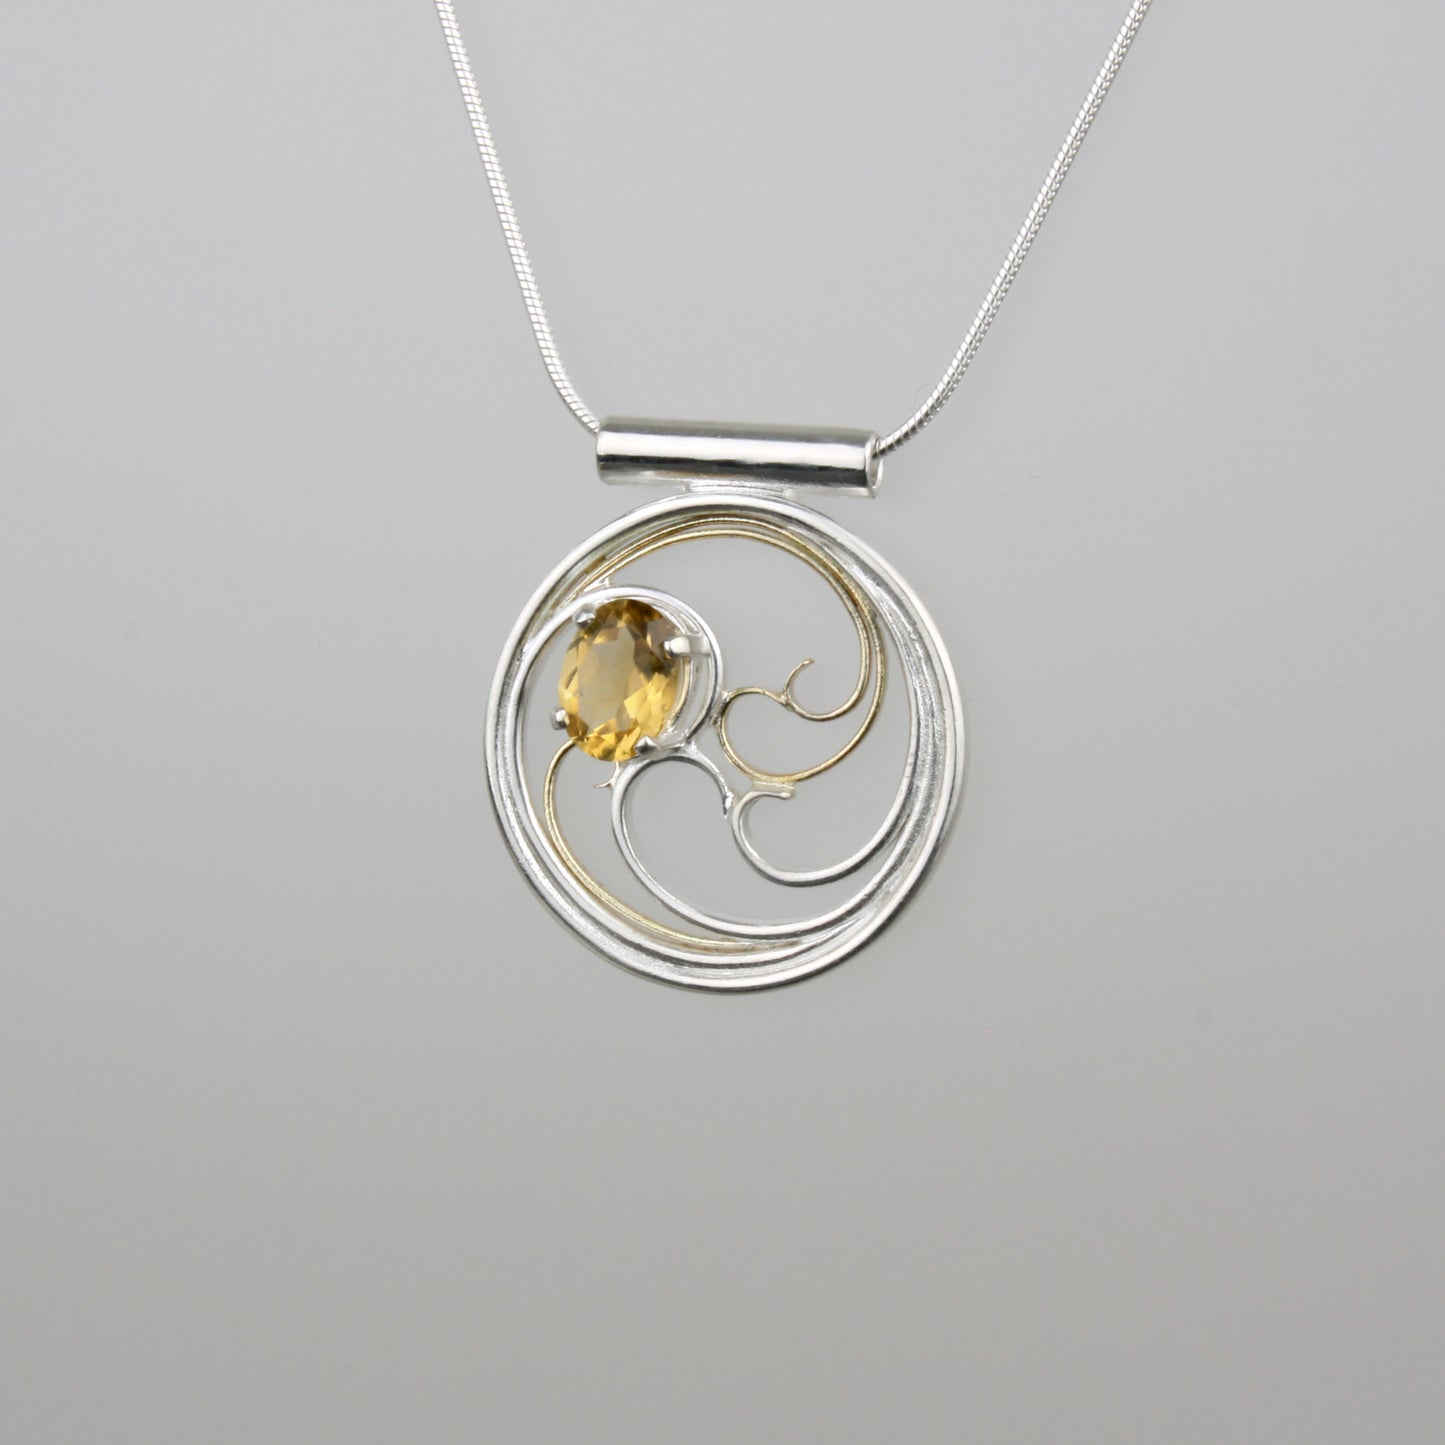 A circular pendant with cascading silver and gold waves encircling a golden yellow oval citrine gem.